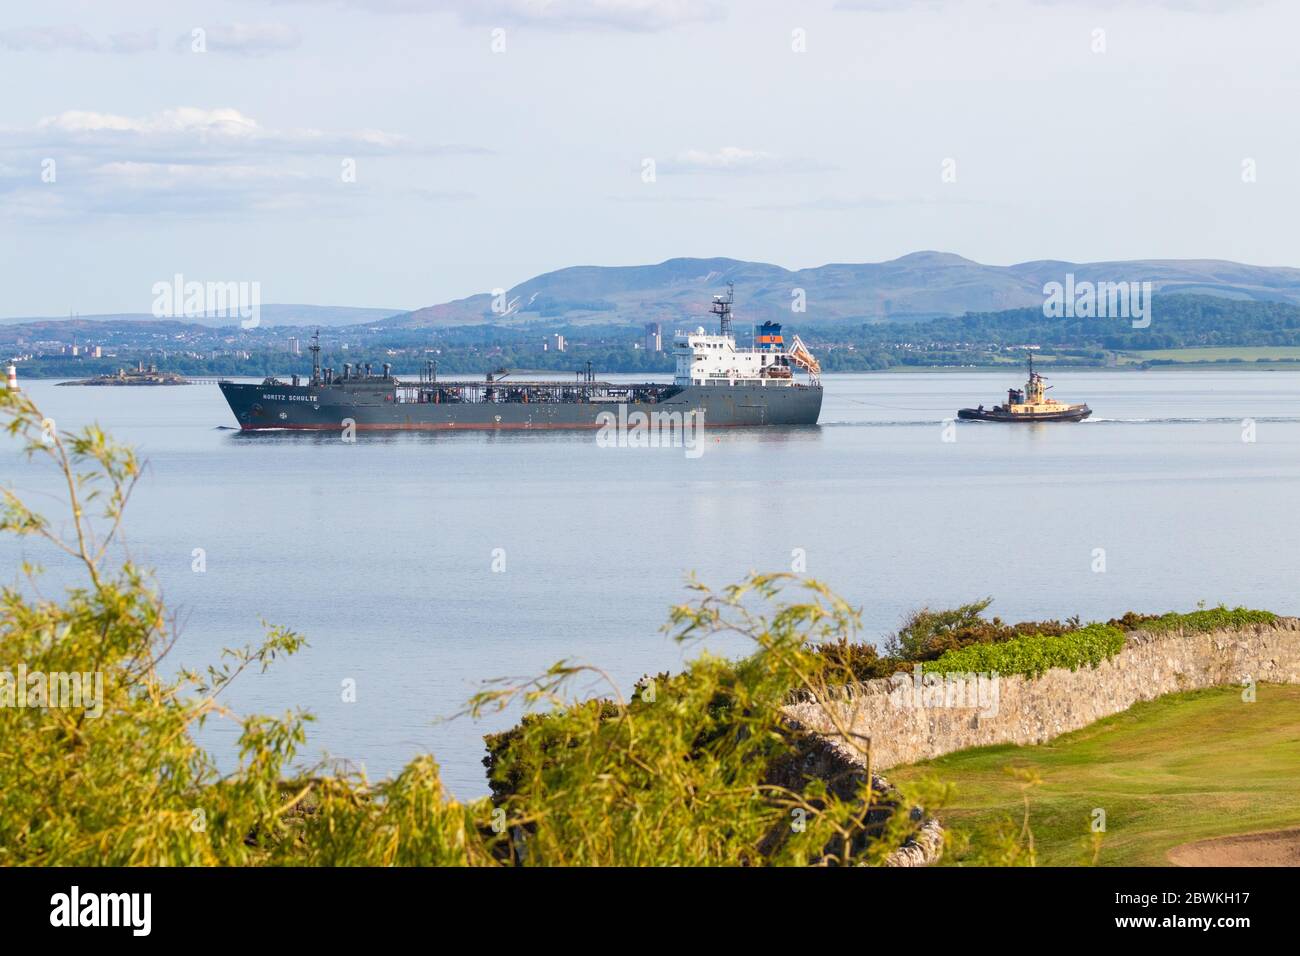 The Moritz Schulte a LPG Tanker in the Firth of Forth near Aberdour, Fife, Scotland. Stock Photo